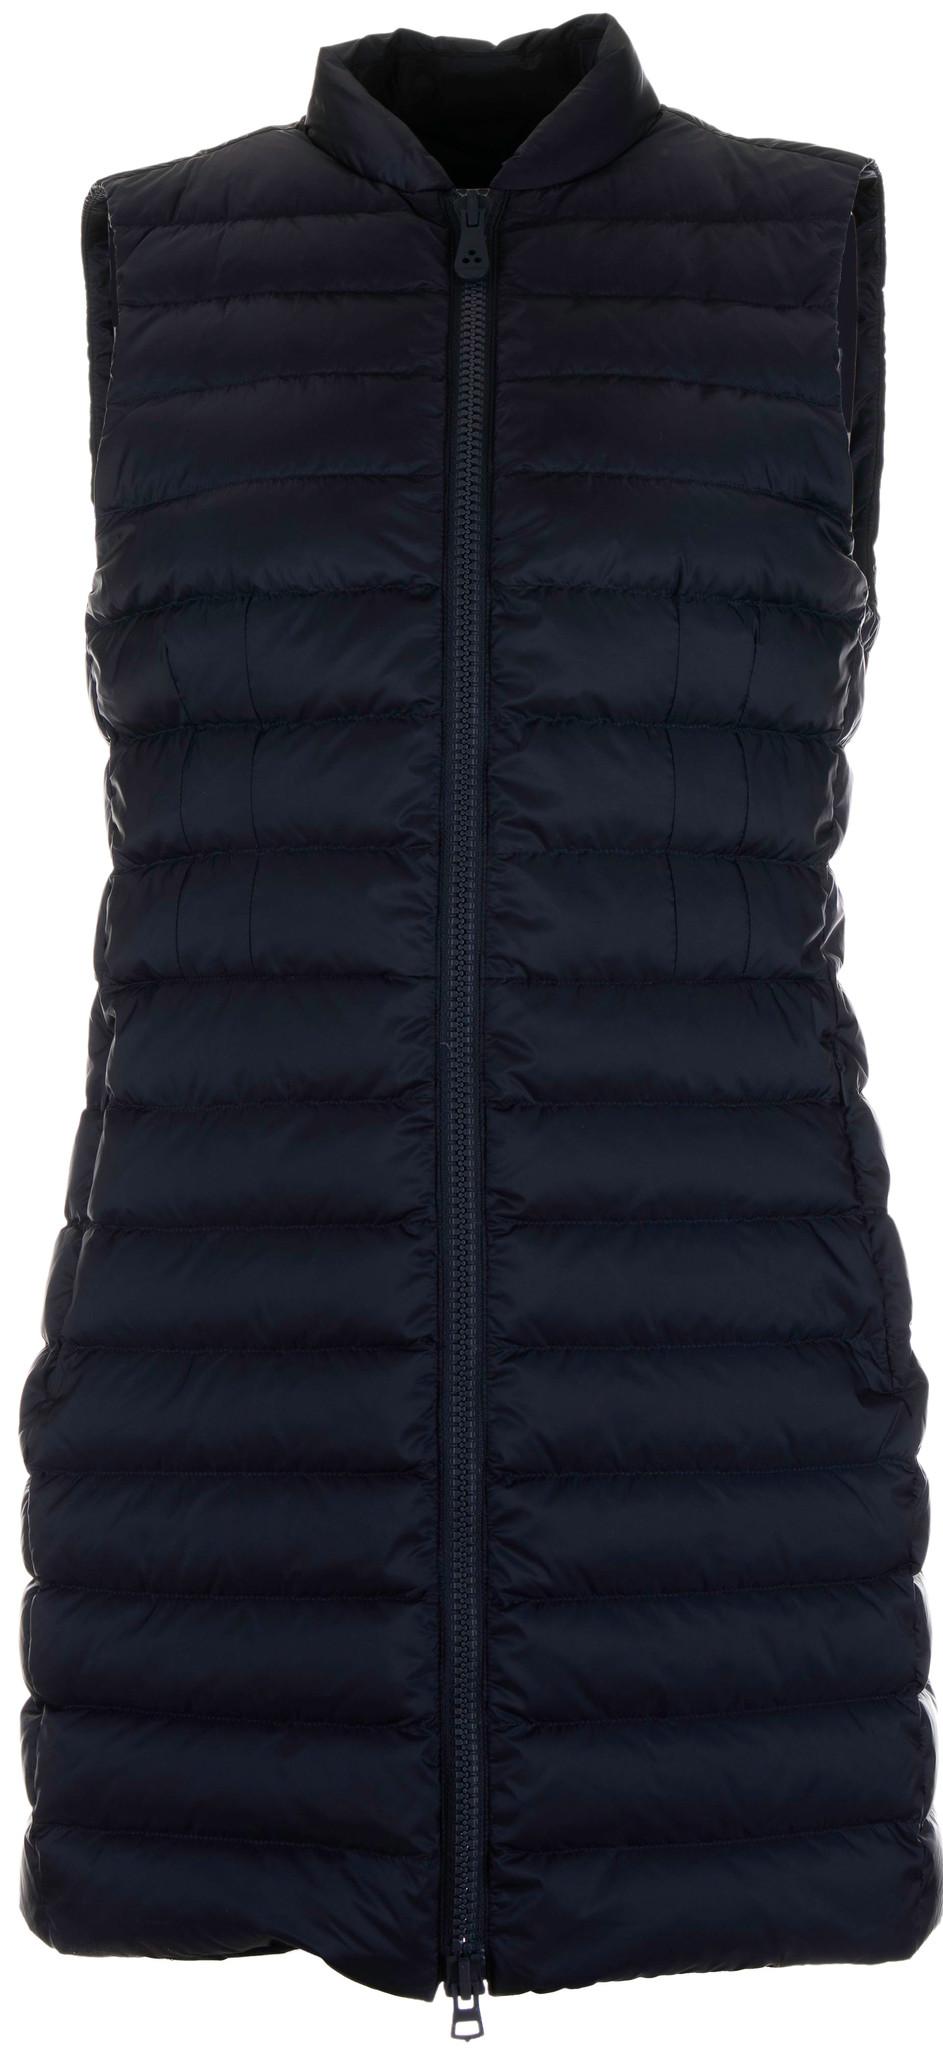 Peuterey Gigas Bodywarmer Donkerblauw Mqe in Blue,Black Womens Clothing Jackets Waistcoats and gilets Blue 